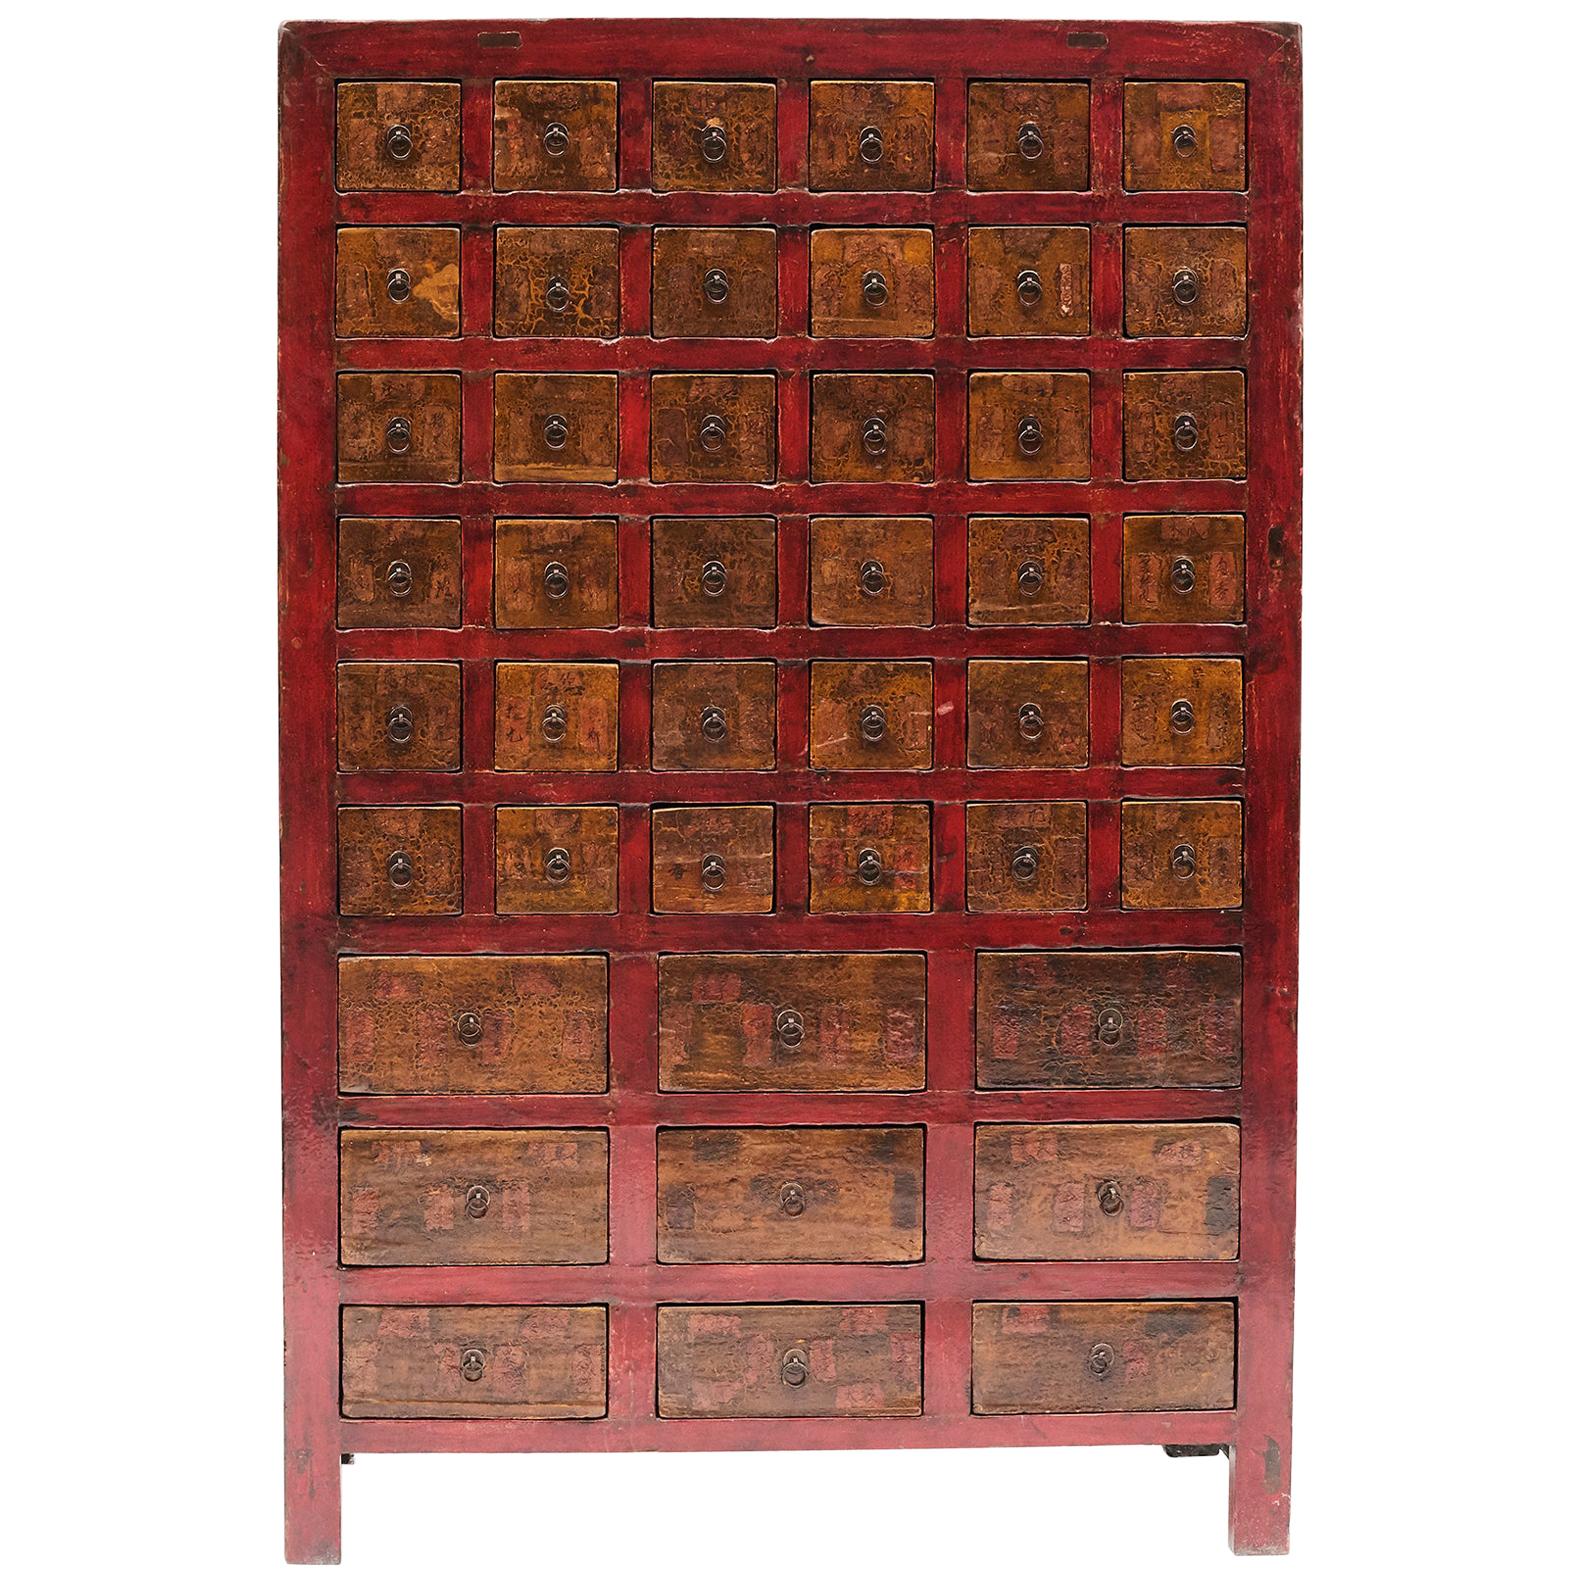 19th Century Chinese Apothecary Medicine Cabinet with 45 Drawers